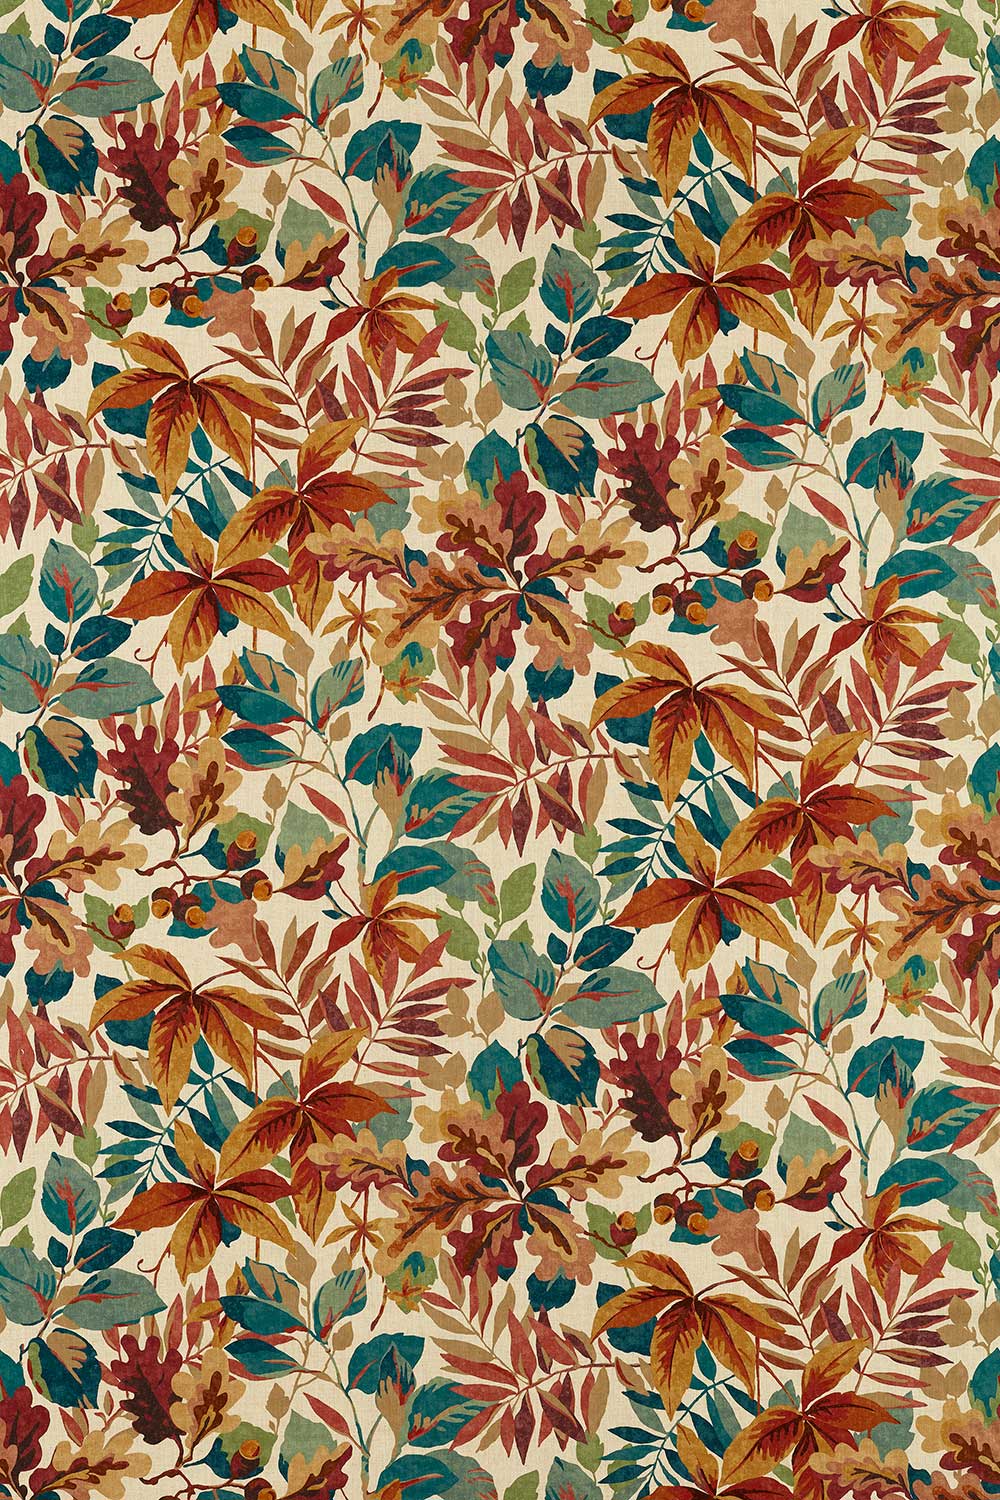 Robins Wood Fabric - Russet - by Sanderson